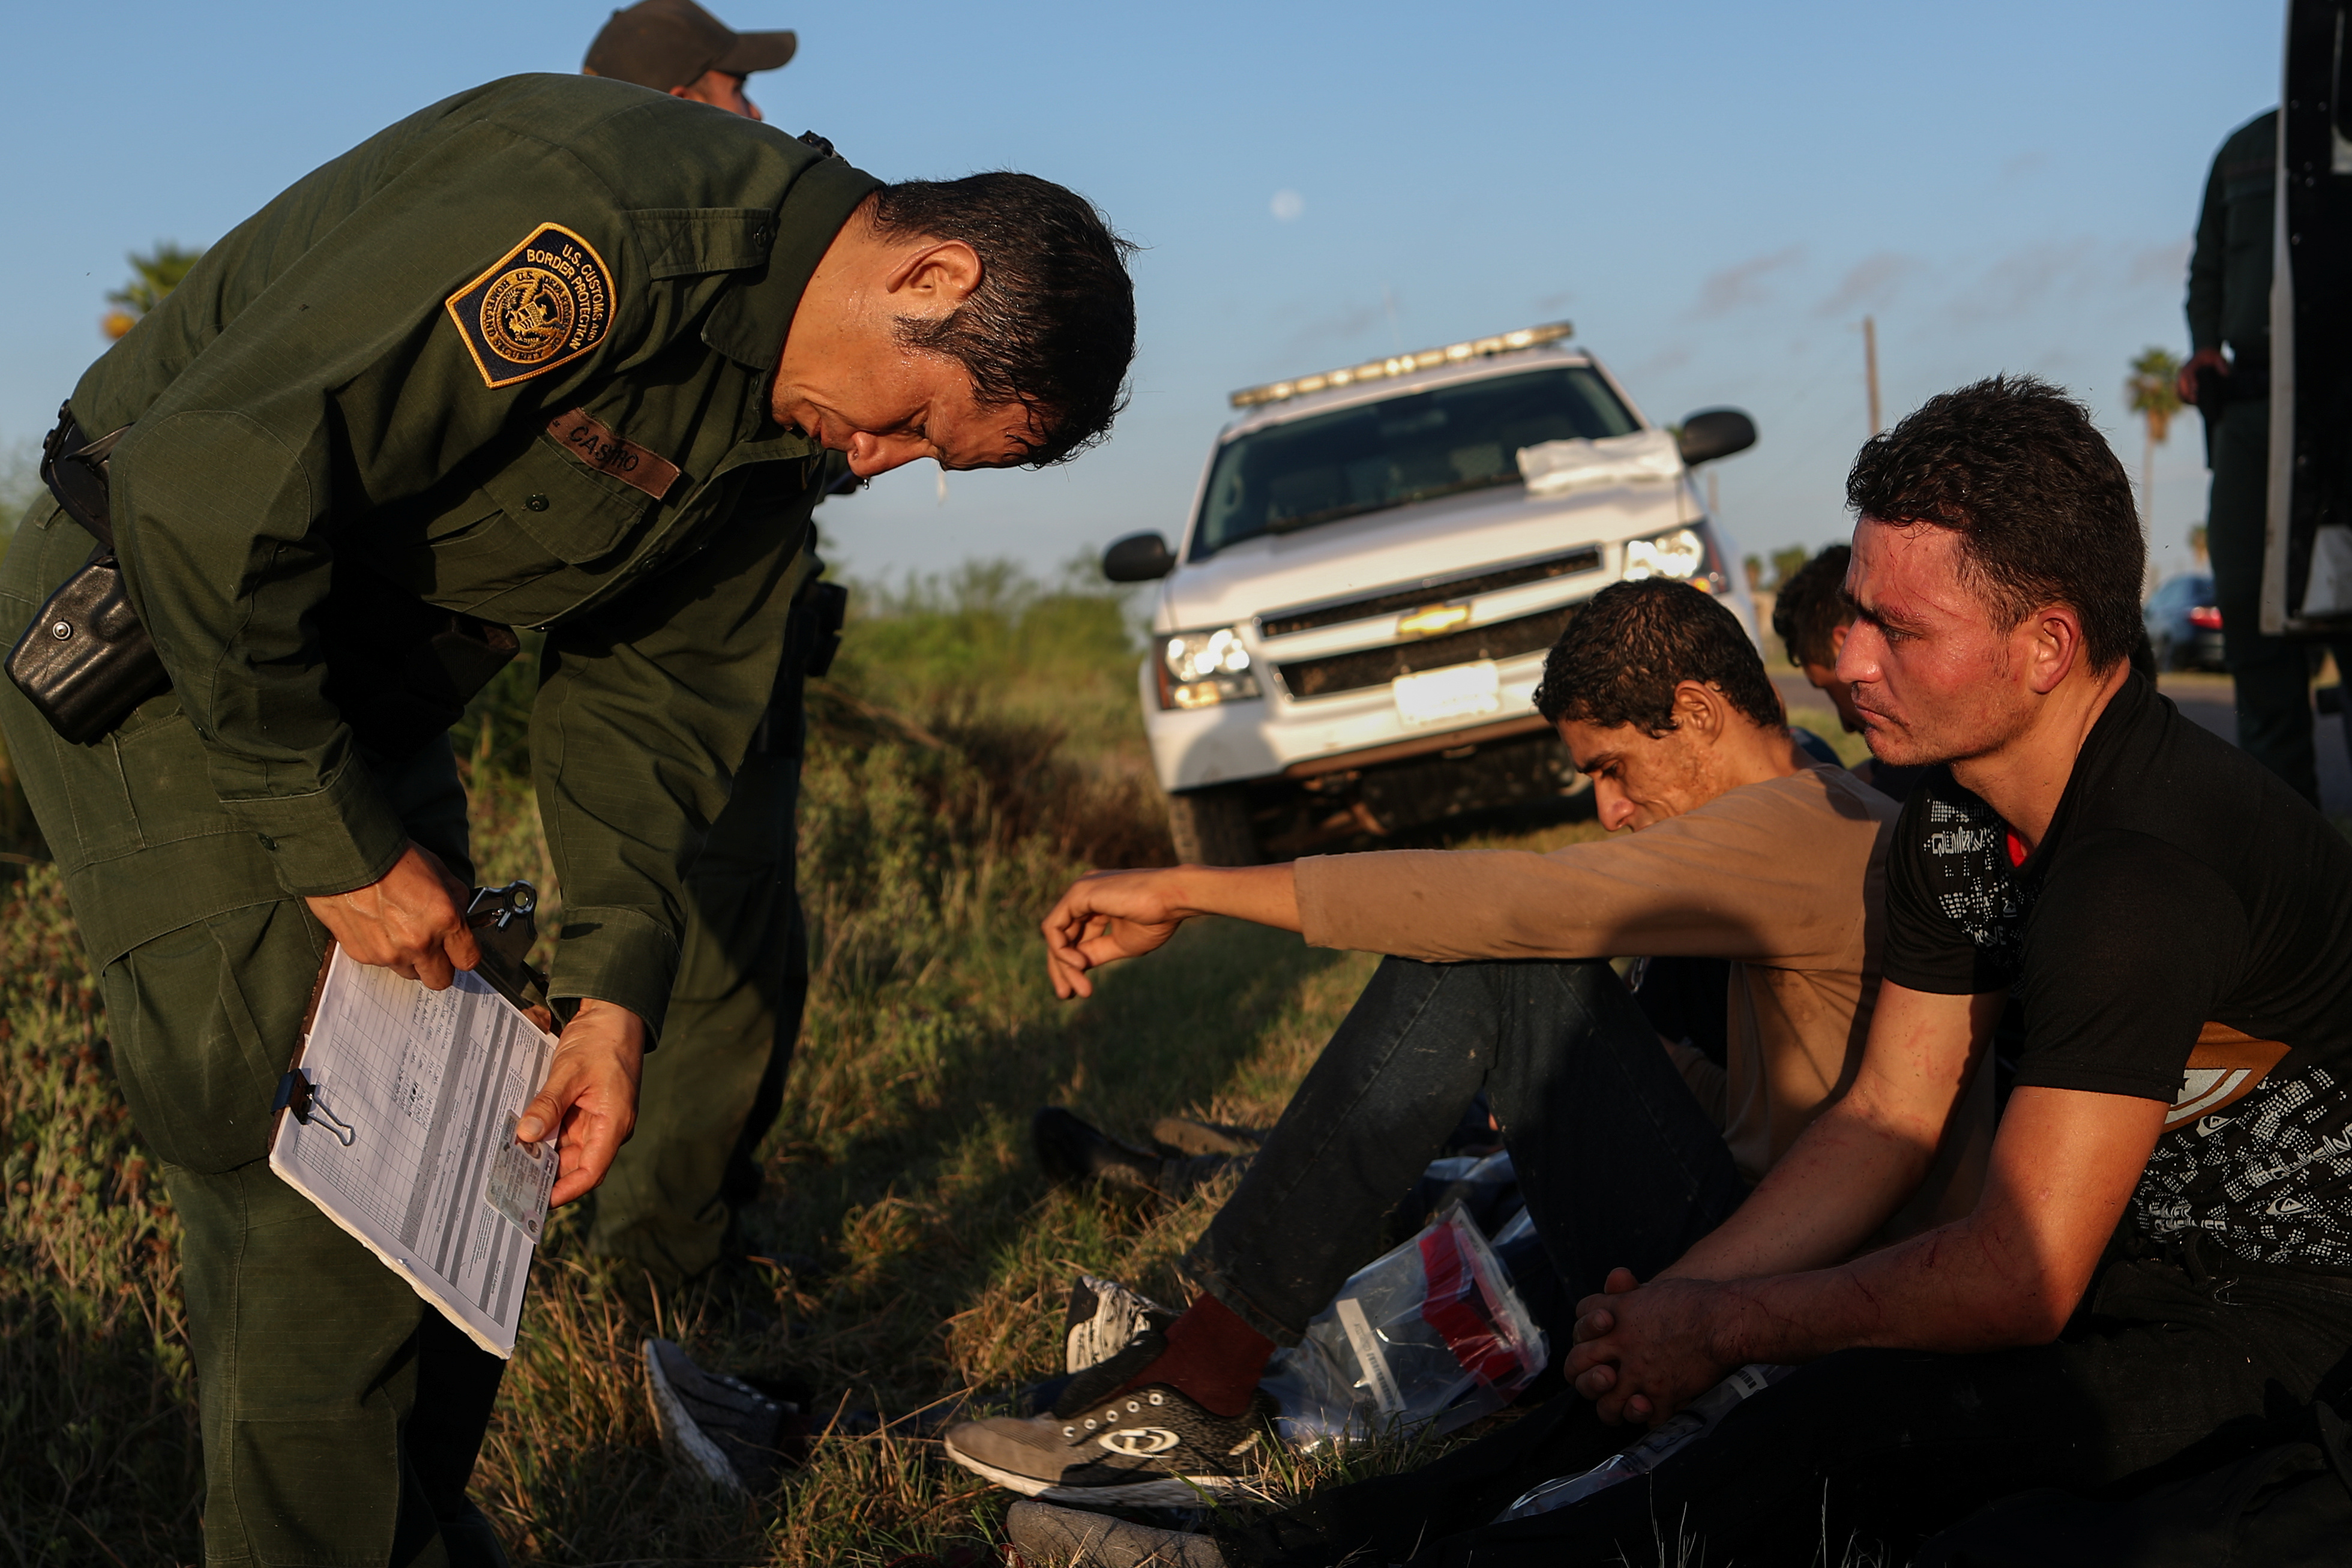 Men from El Salvador are apprehended by the border patrol after they illegally crossed into the United States from Mexico in La Joya, Texas